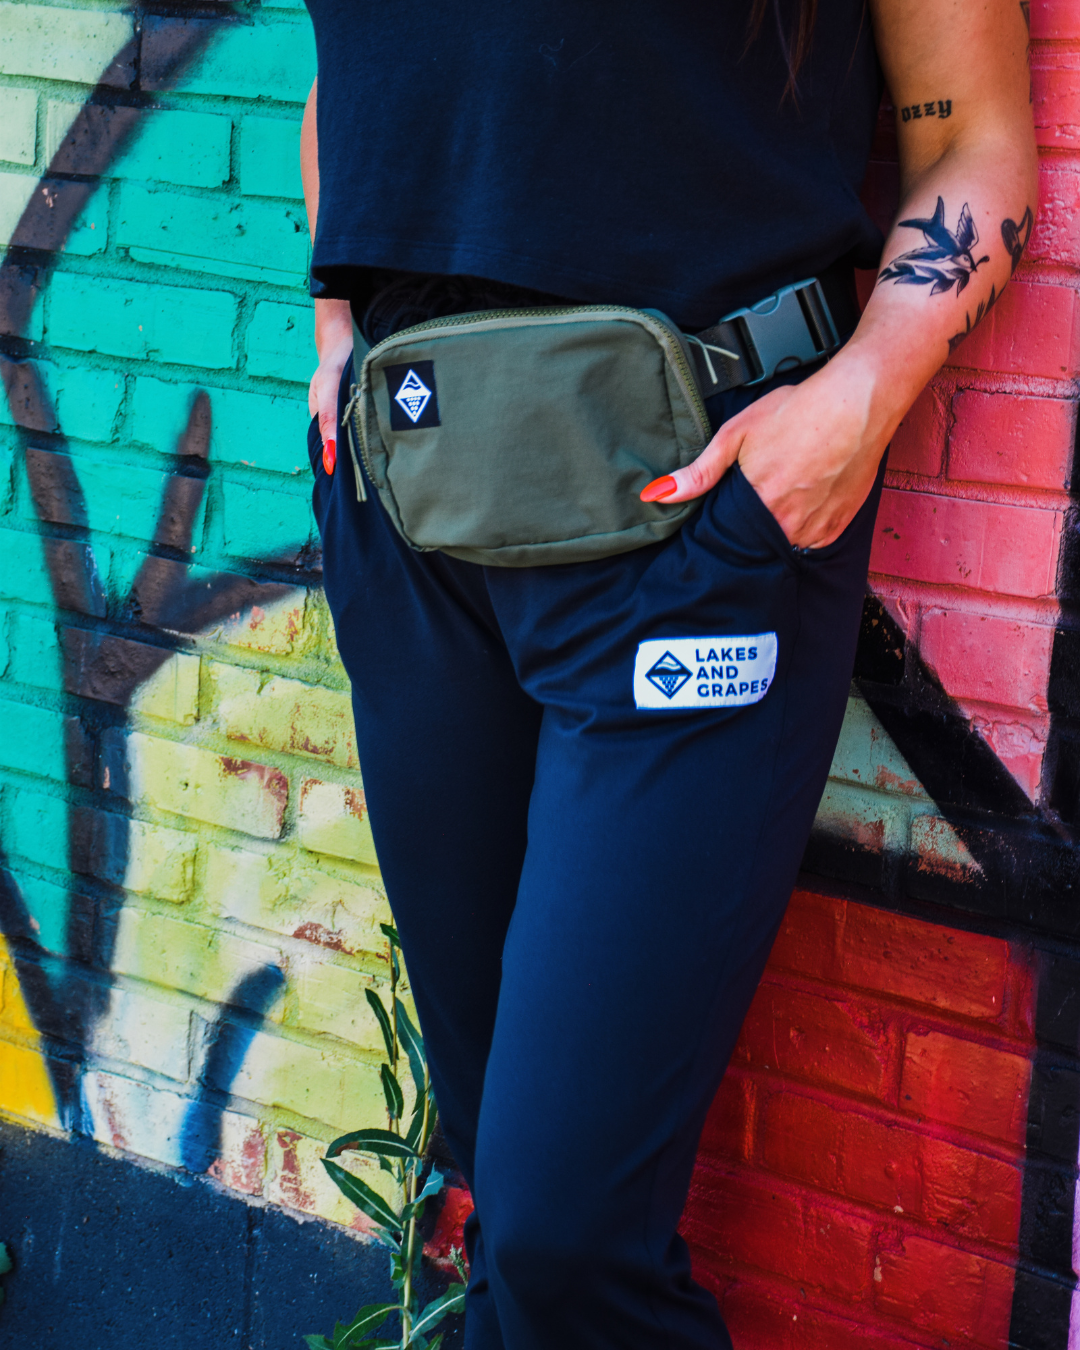 This image showcases the Lakes and Grapes Classic Belt Bag in Forest Green. It's crafted with both fashion and function in mind, providing a secure and accessible way to carry your essentials while on the go.